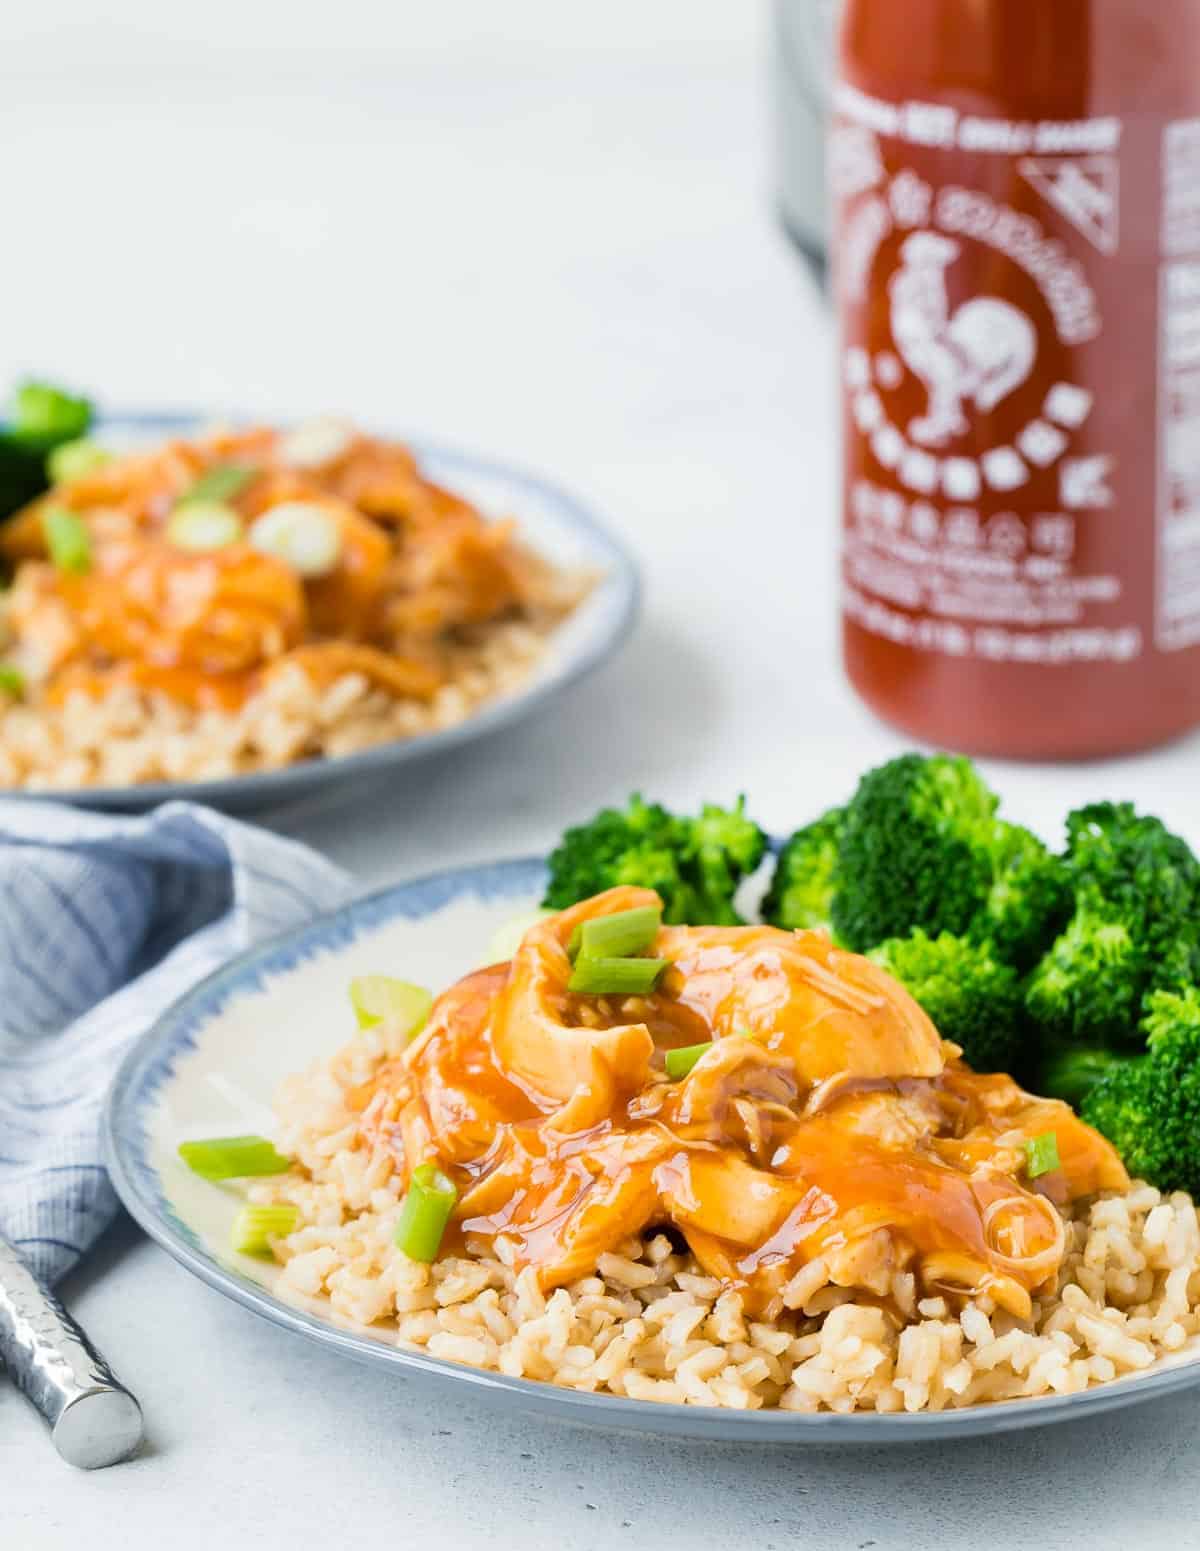 Cooked chicken, rice, and broccoli, with a bottle of sriracha in the background.